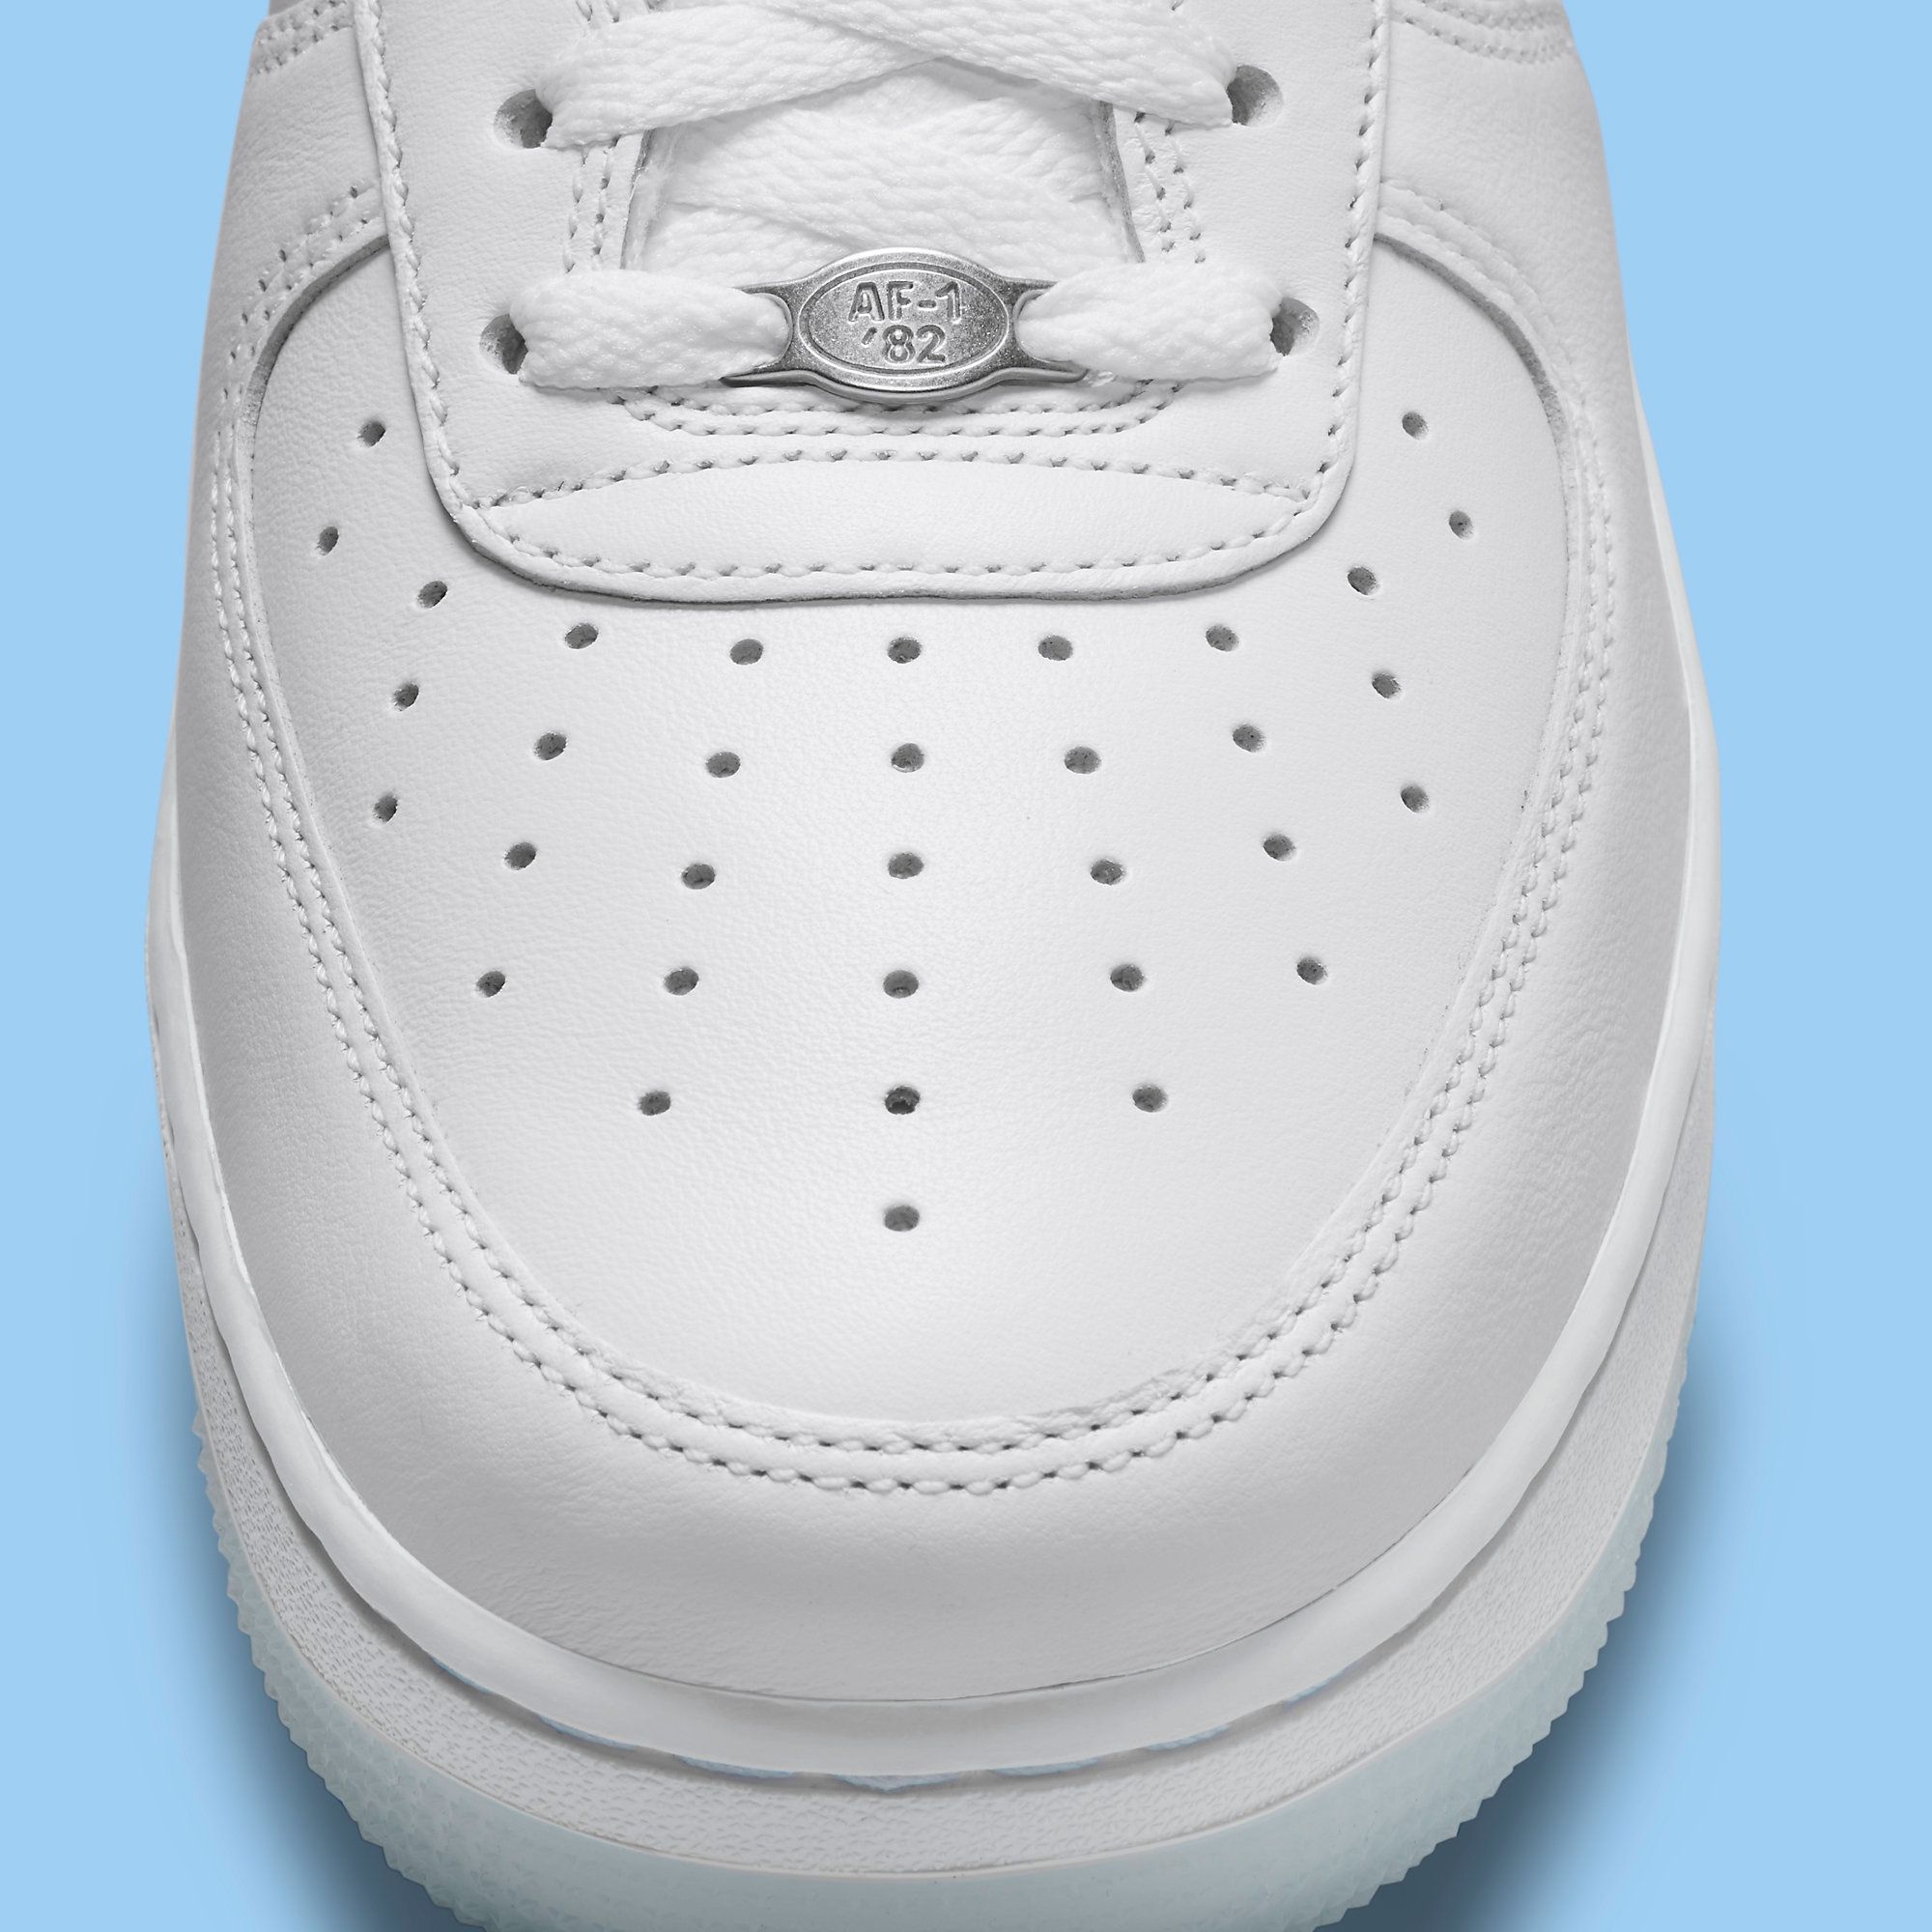 Get ready for the Terror Squad x Nike Air Force 1 Low drop